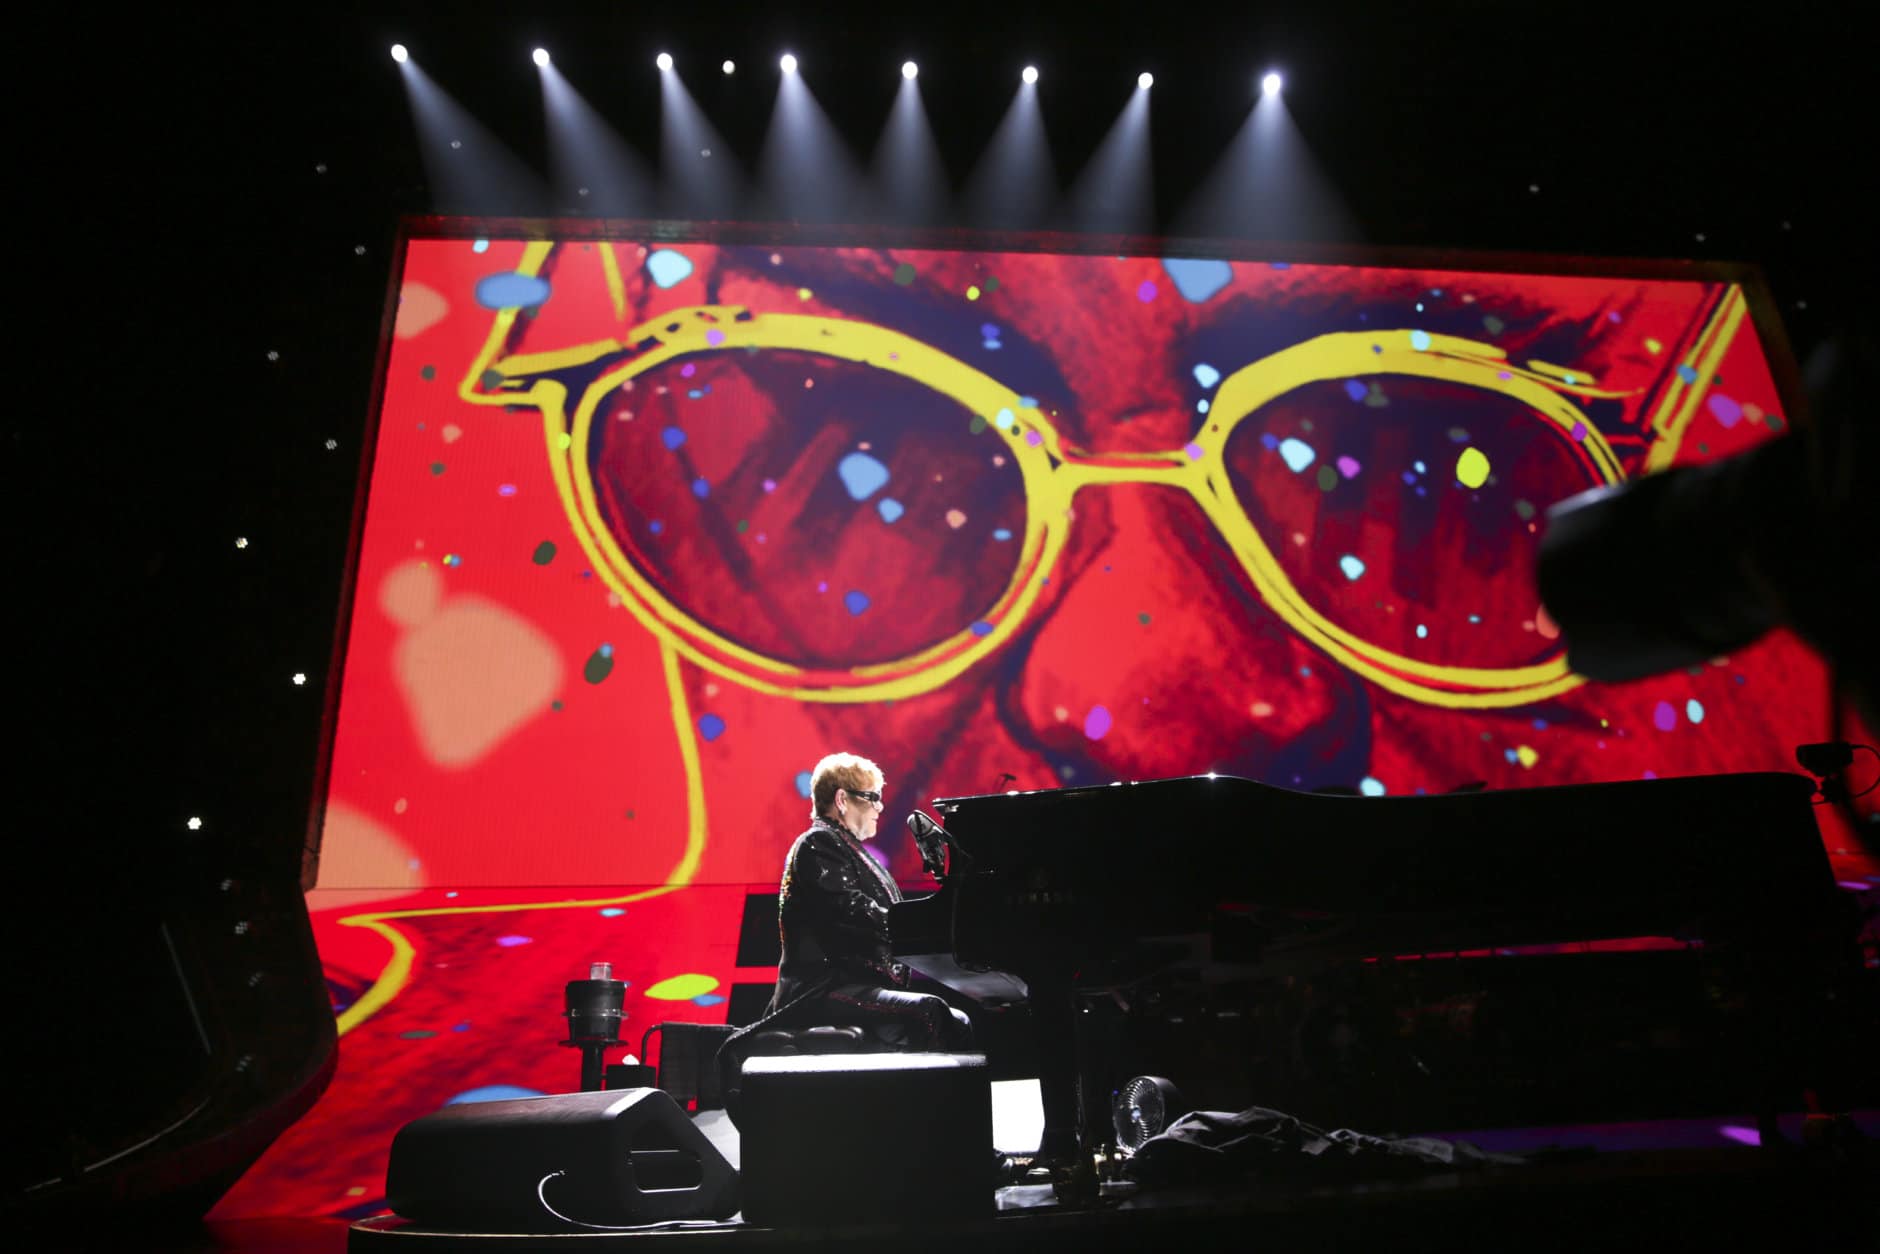 Singer/songwriter Elton John performs onstage during his "Farewell Yellow Brick Road" final tour at Capital One Arena on Friday, Sept., 21, 2018, in Washington, D.C. (Photo by Brent N. Clarke/Invision/AP)